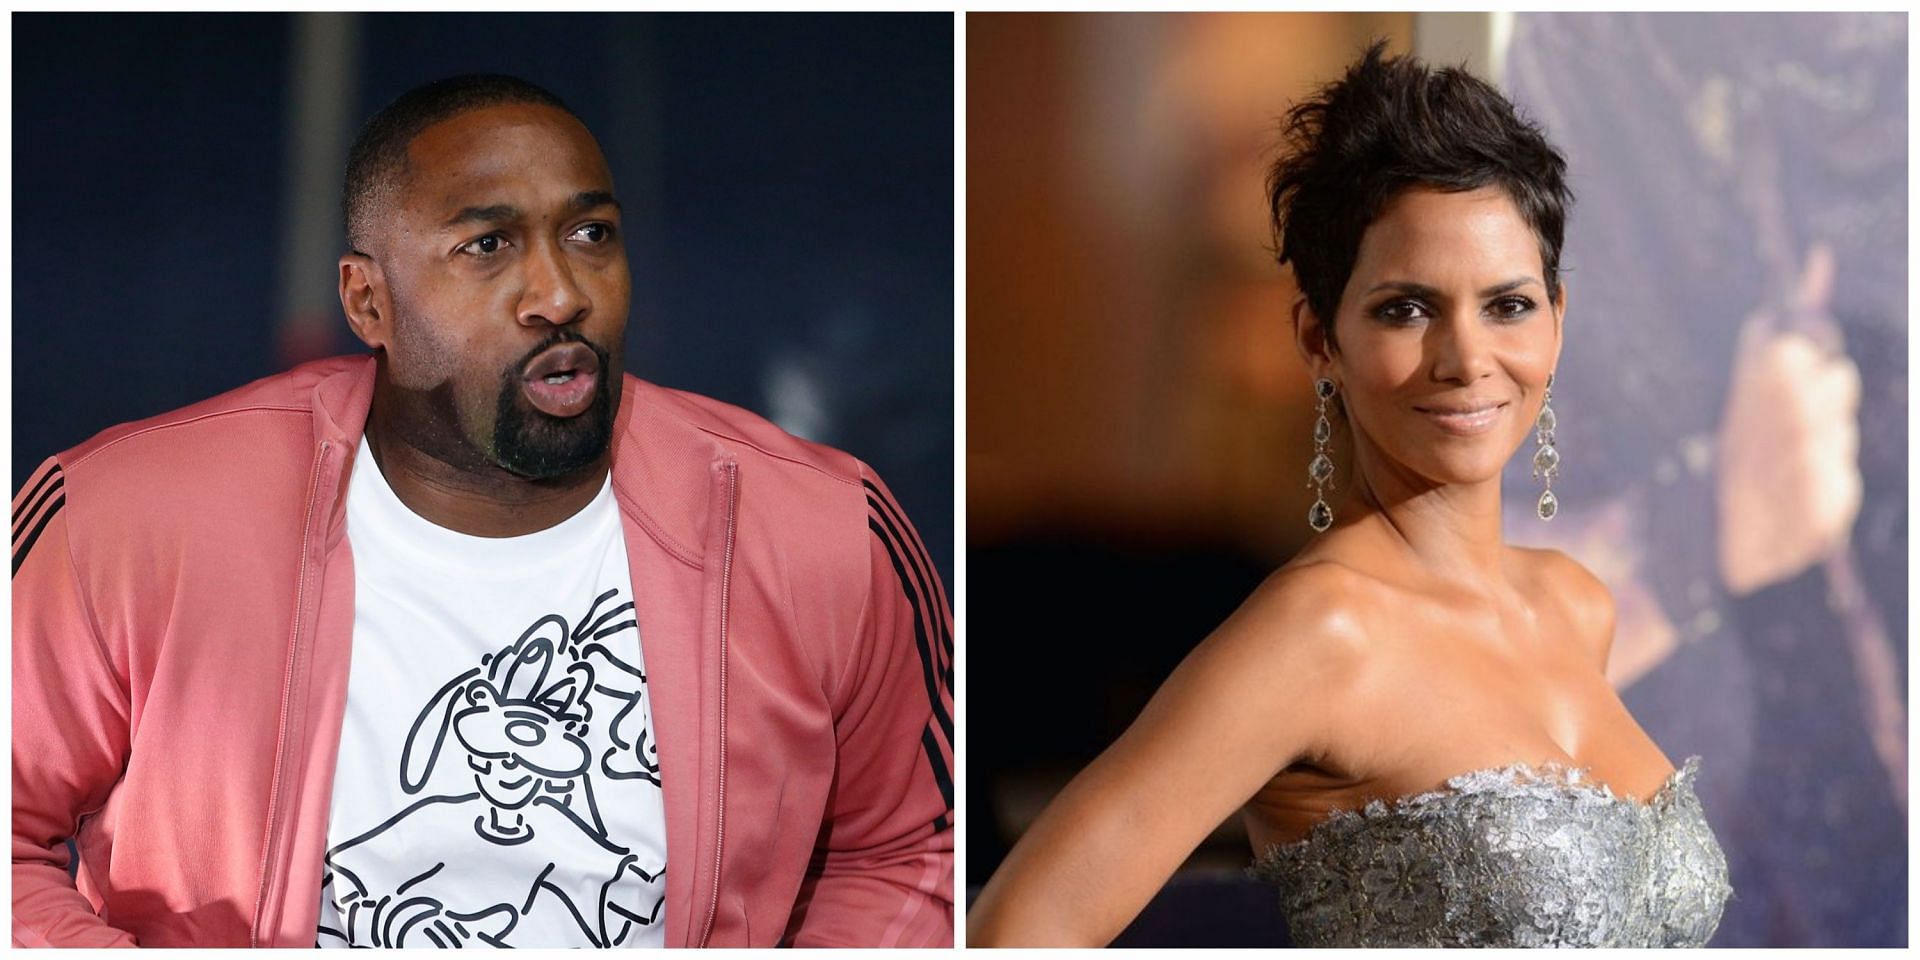 Gilbert Arenas reveals overhearing Harvey Weinstein bragging about getting intimate with Halle Berry